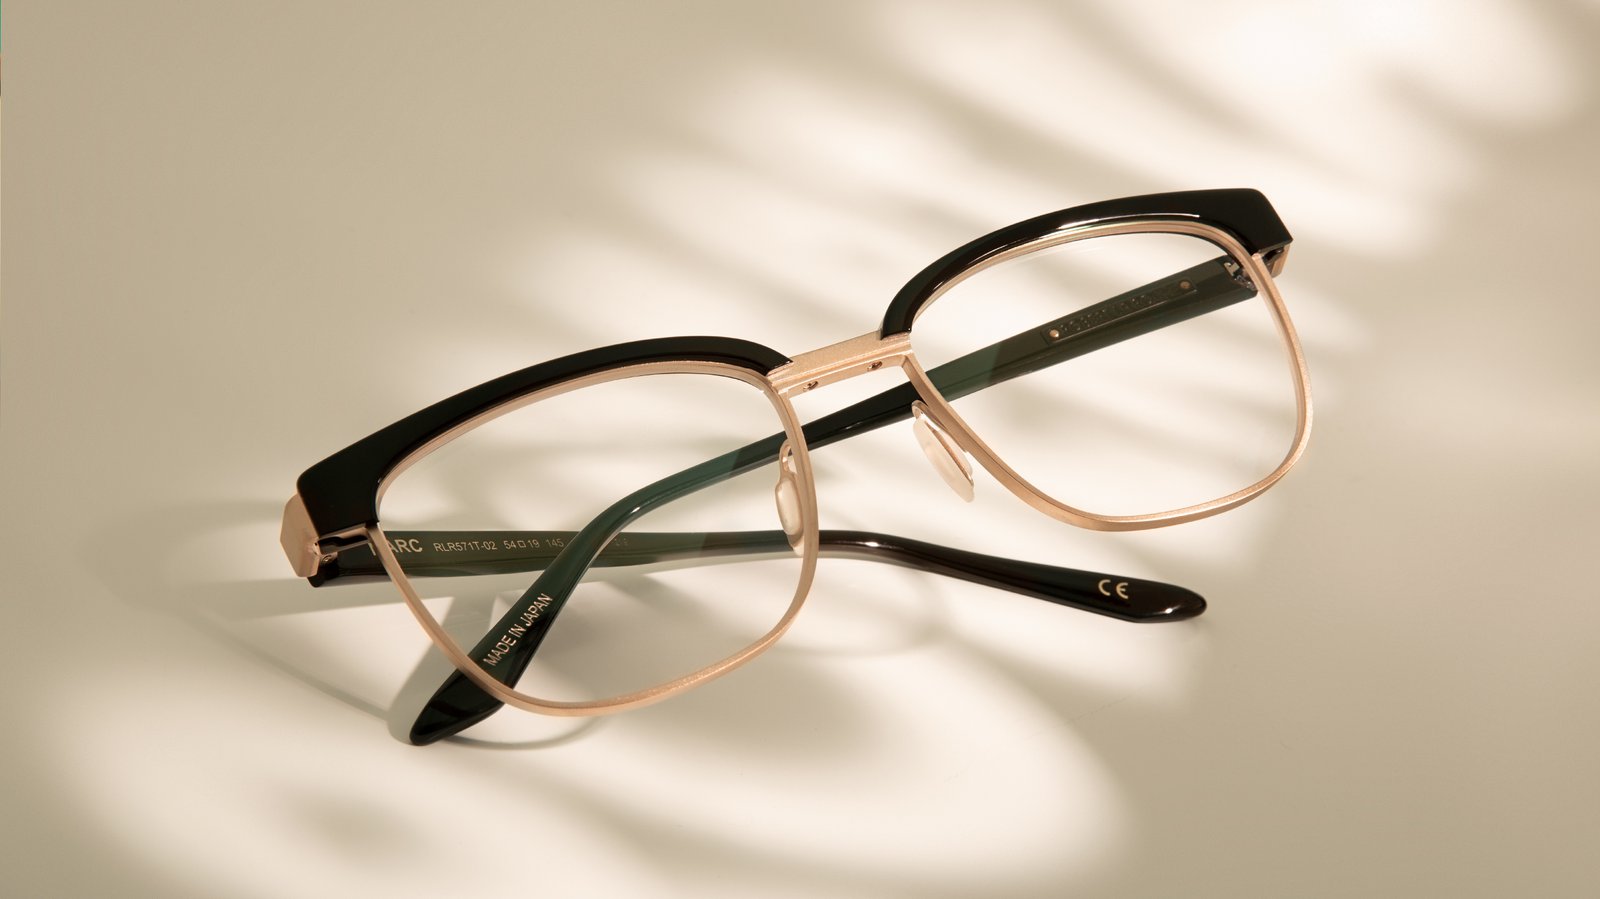 Eyeglasses by ROBERT LAROCHE from article The Best Independent Eyewear Brands published by FAVR the premium eyewear finder.